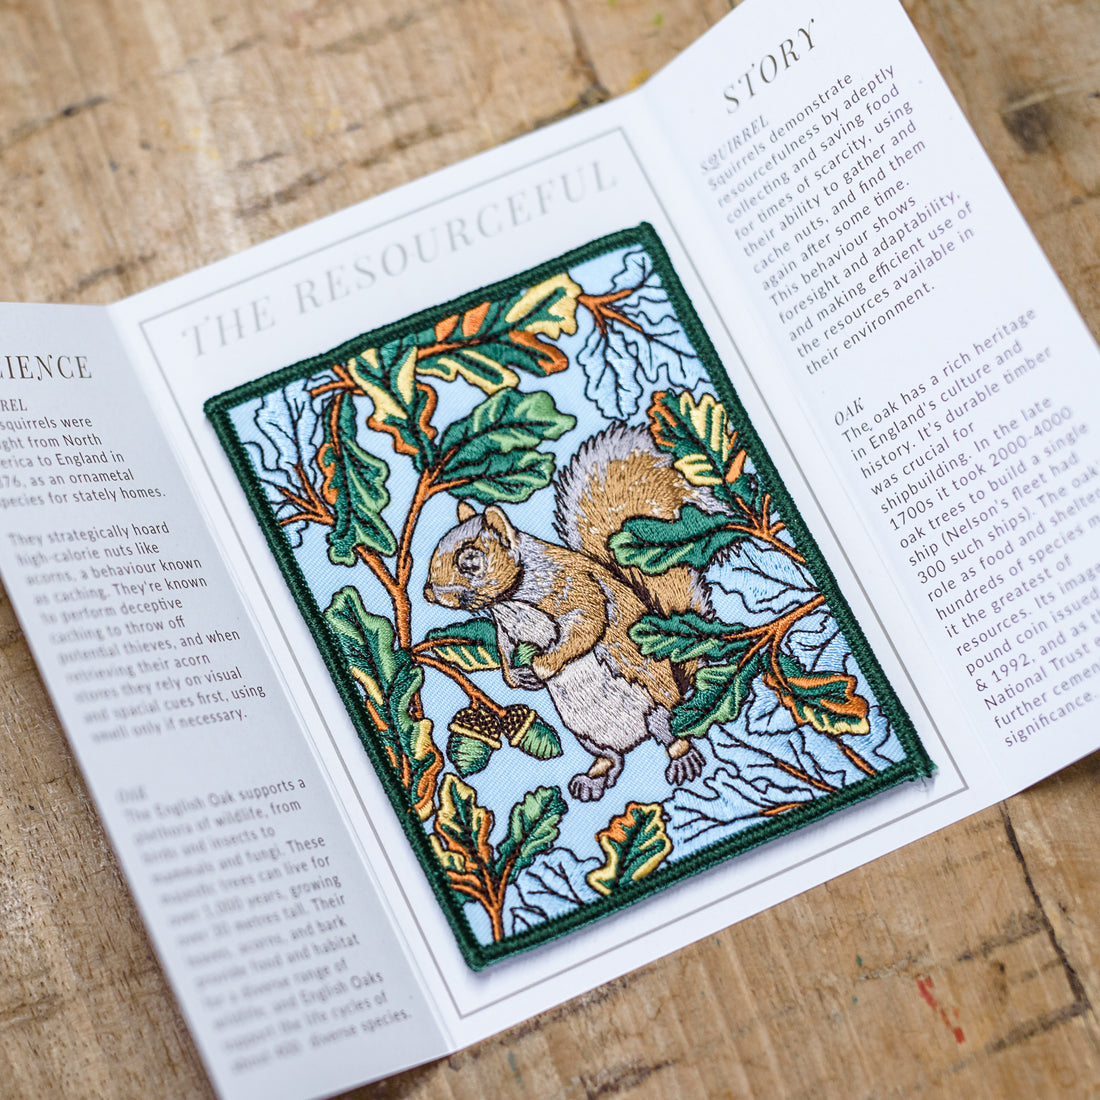 Grey Squirrel and Oak Tree Embroidered Patch in gatefold card with science and story behind the species